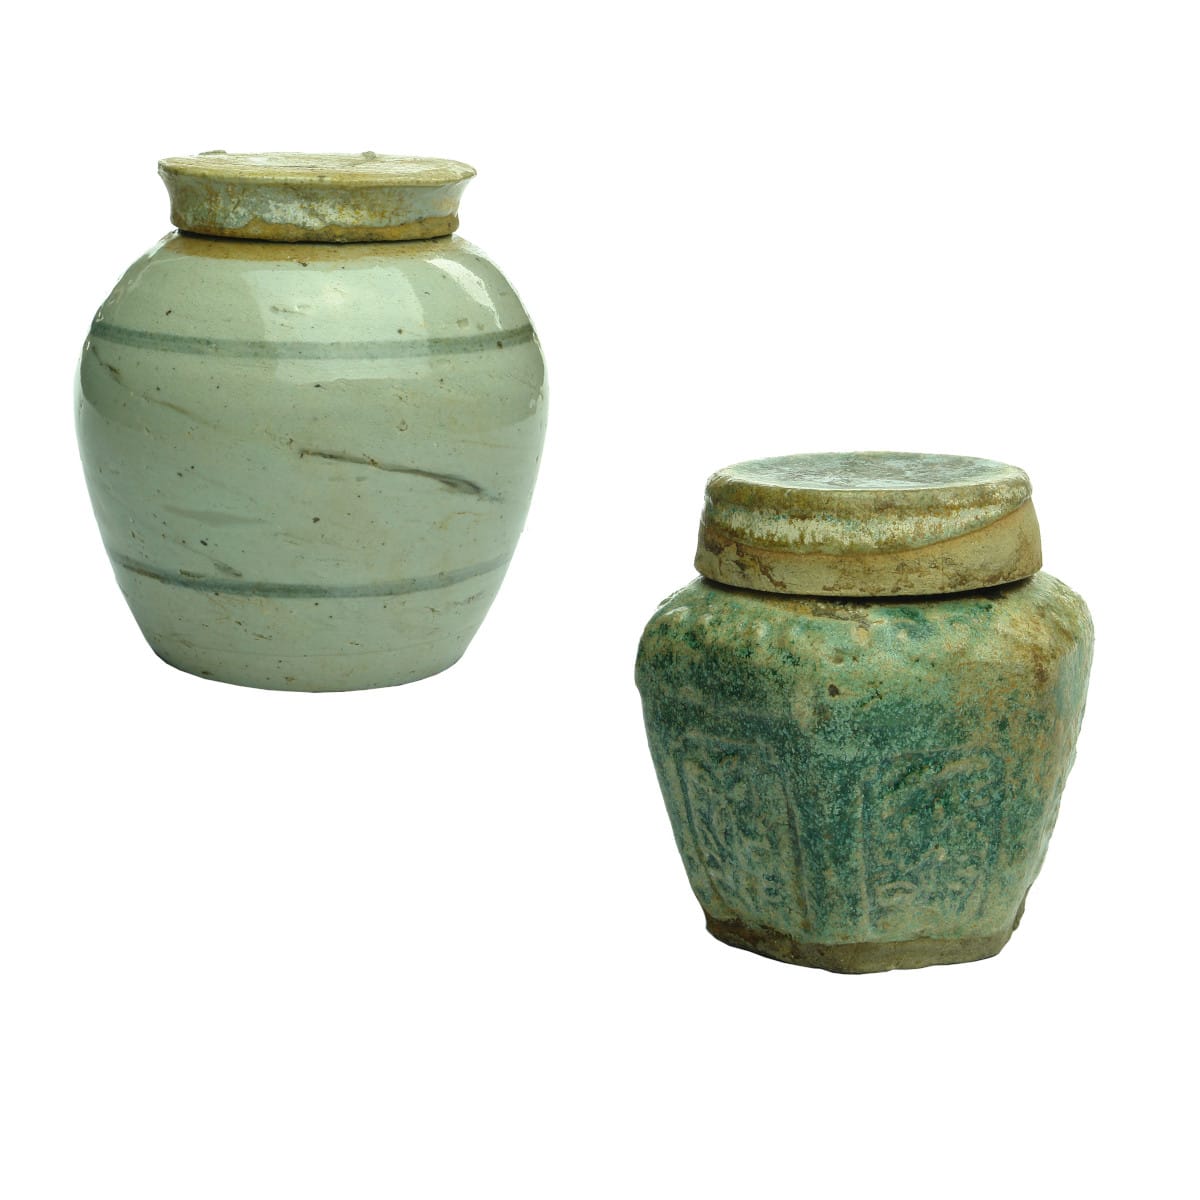 2 Chinese Ginger Jars. Large grey with dark bands. Small green hexagonal.